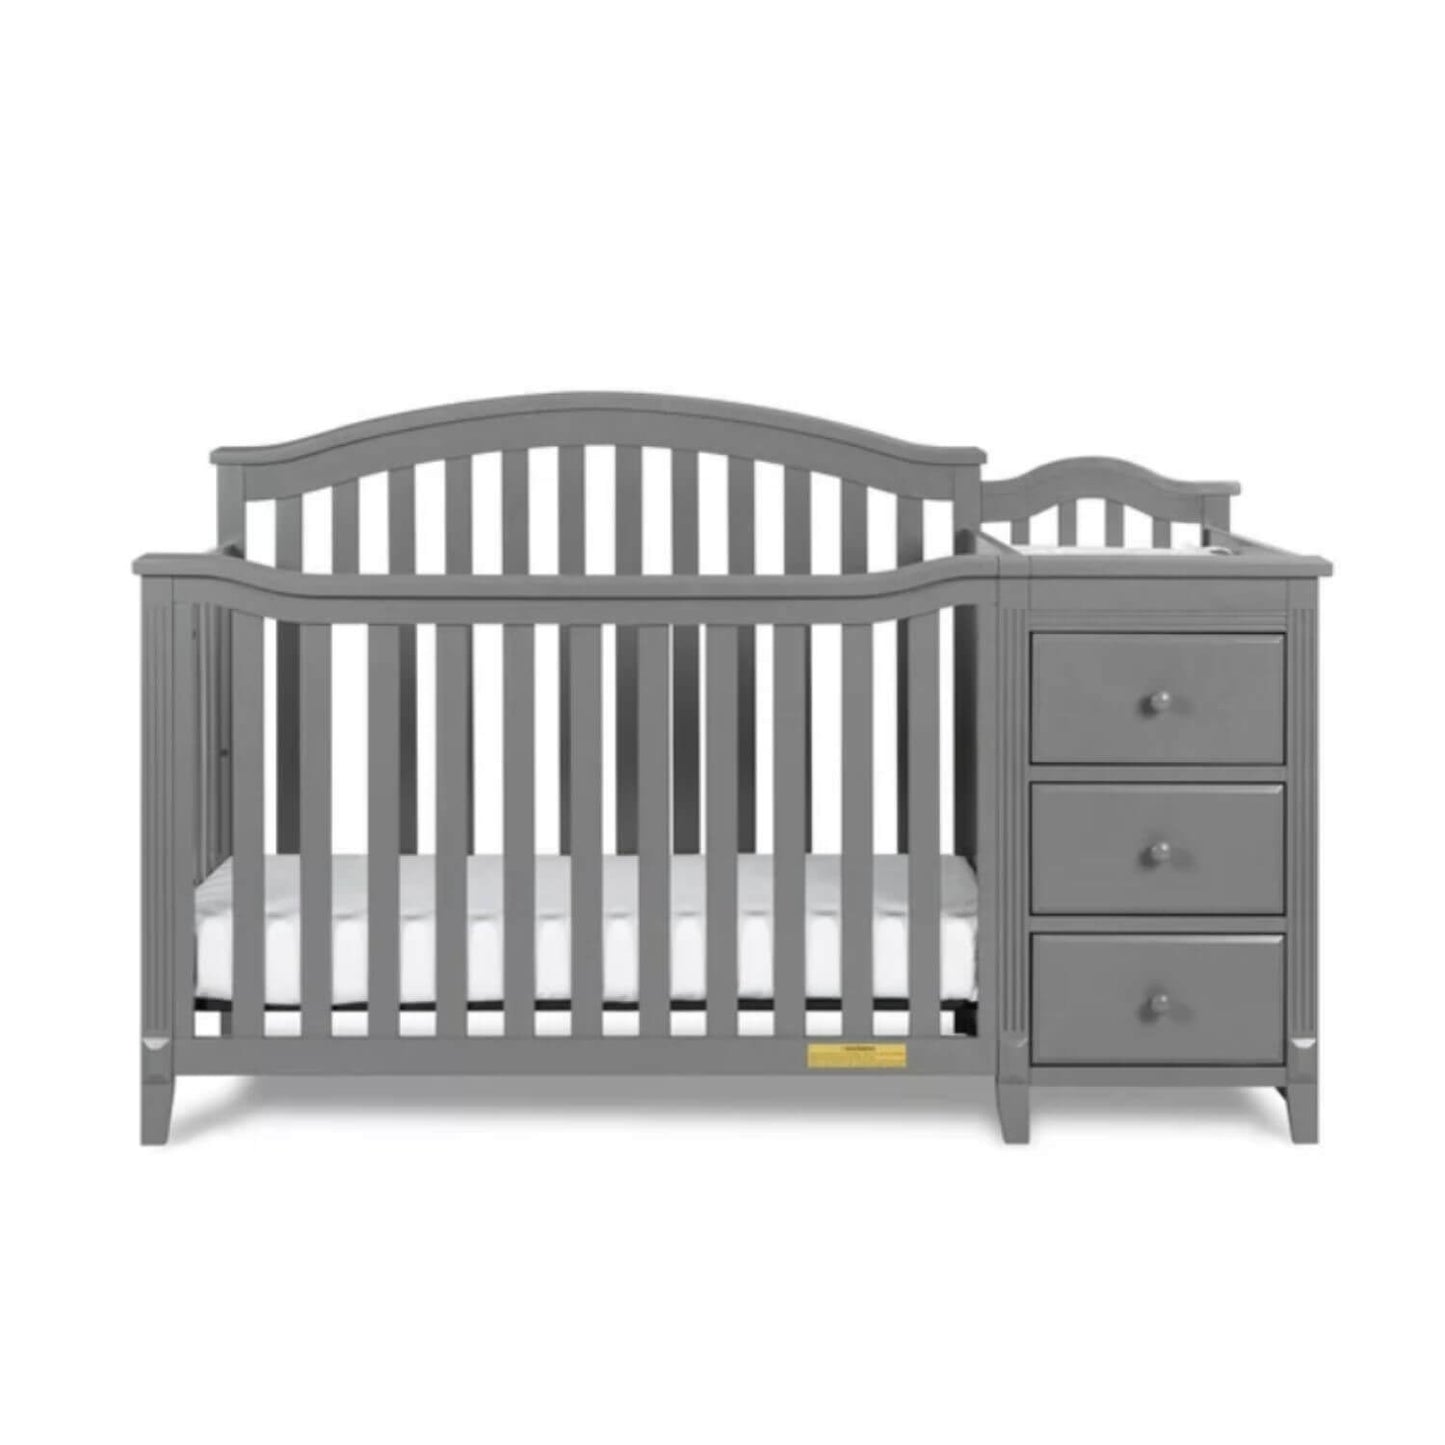 AFG Kali II 4-in-1 Convertible Crib and Changer Gray